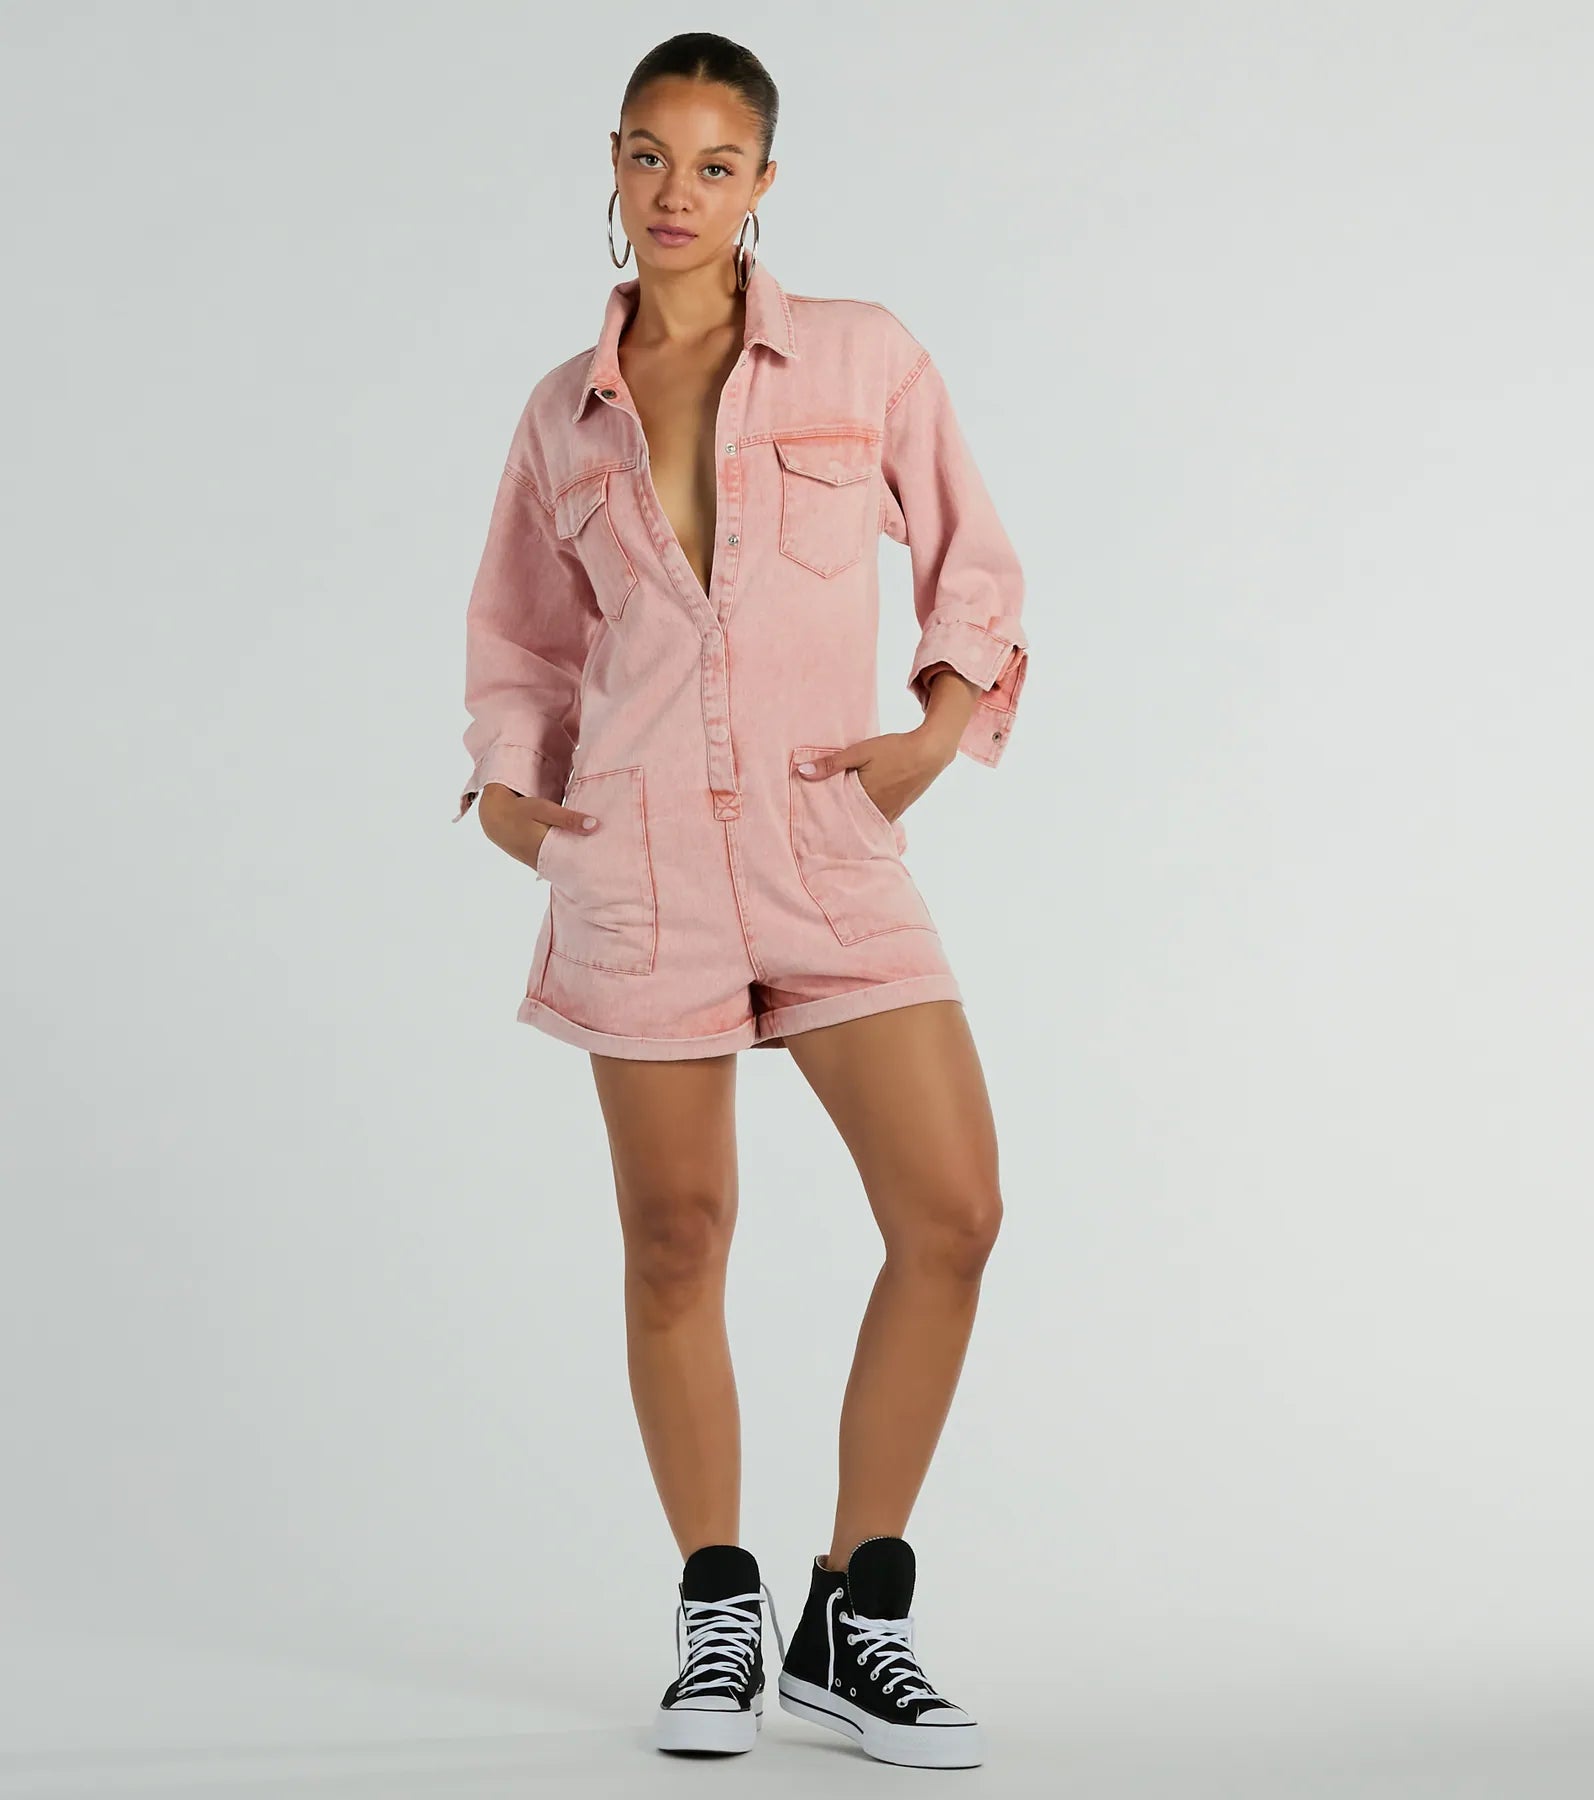 Denim Pocketed Button Front Long Sleeves Collared Romper